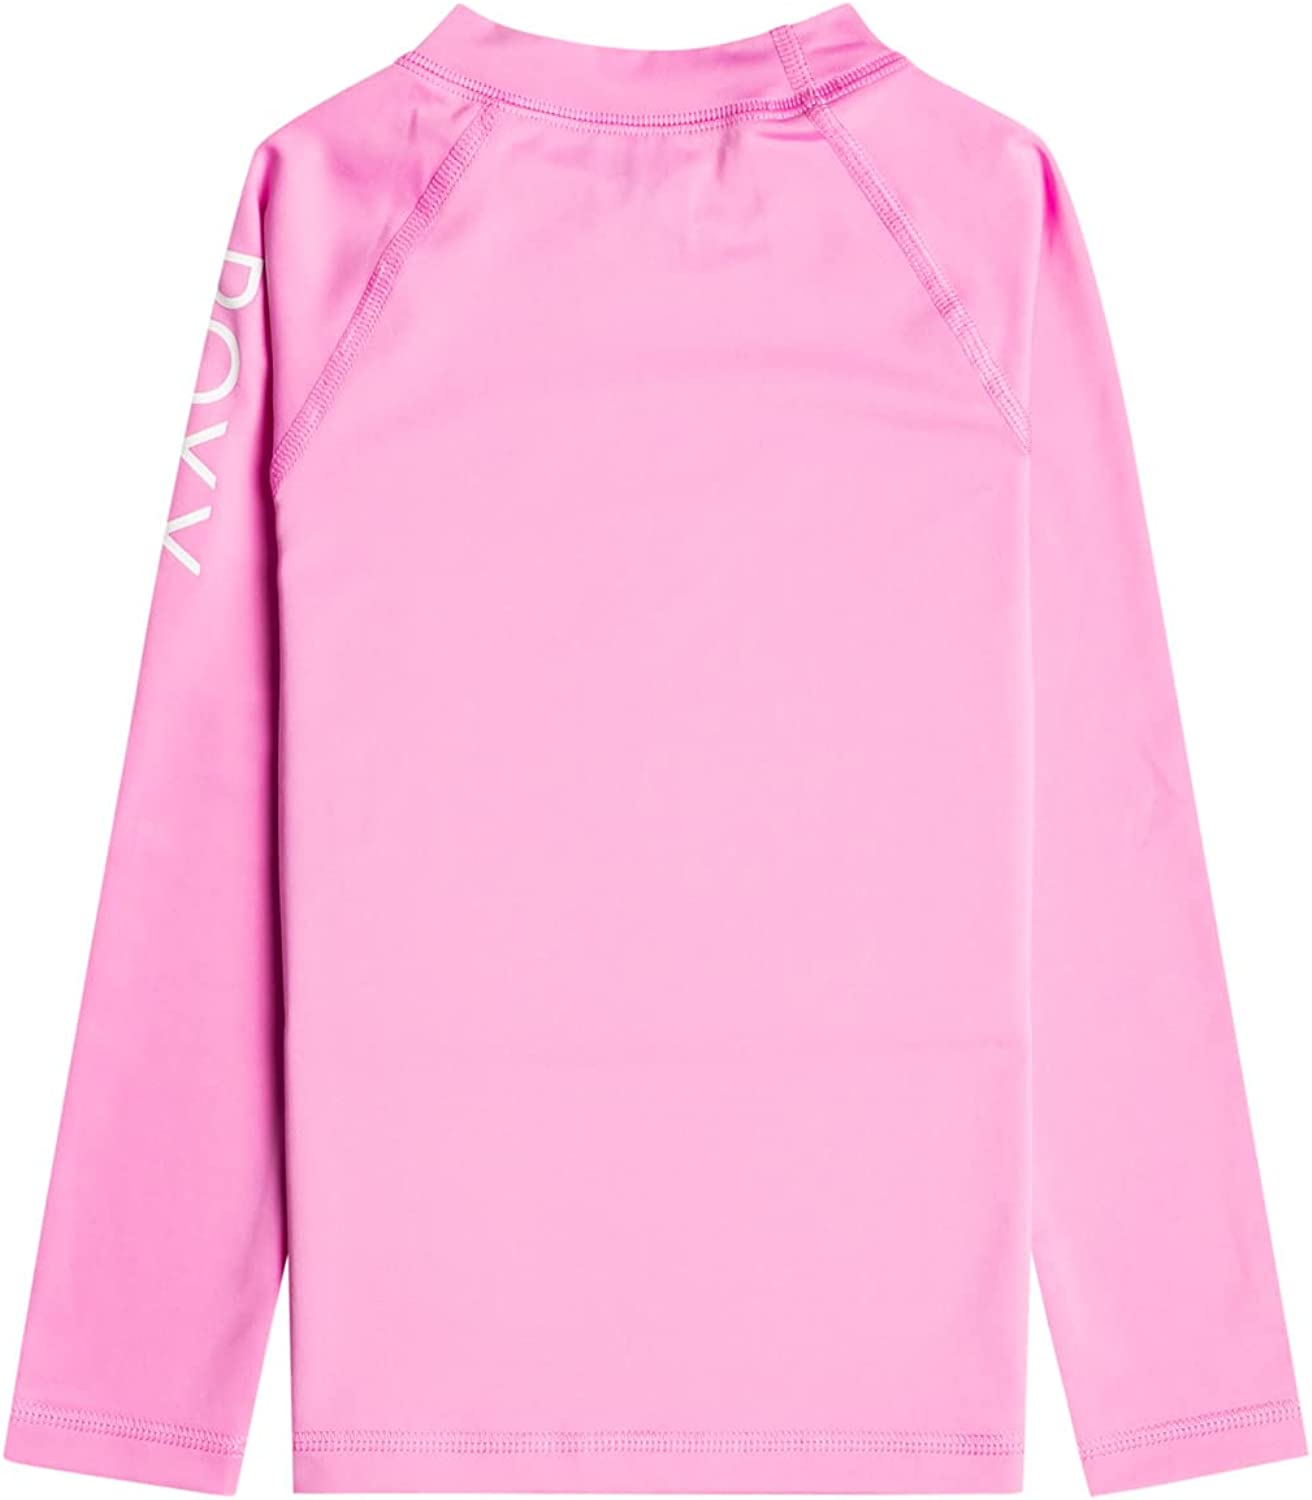 Roxy Girls Whole Hearted Long Sleeved Rash Vest in Pink